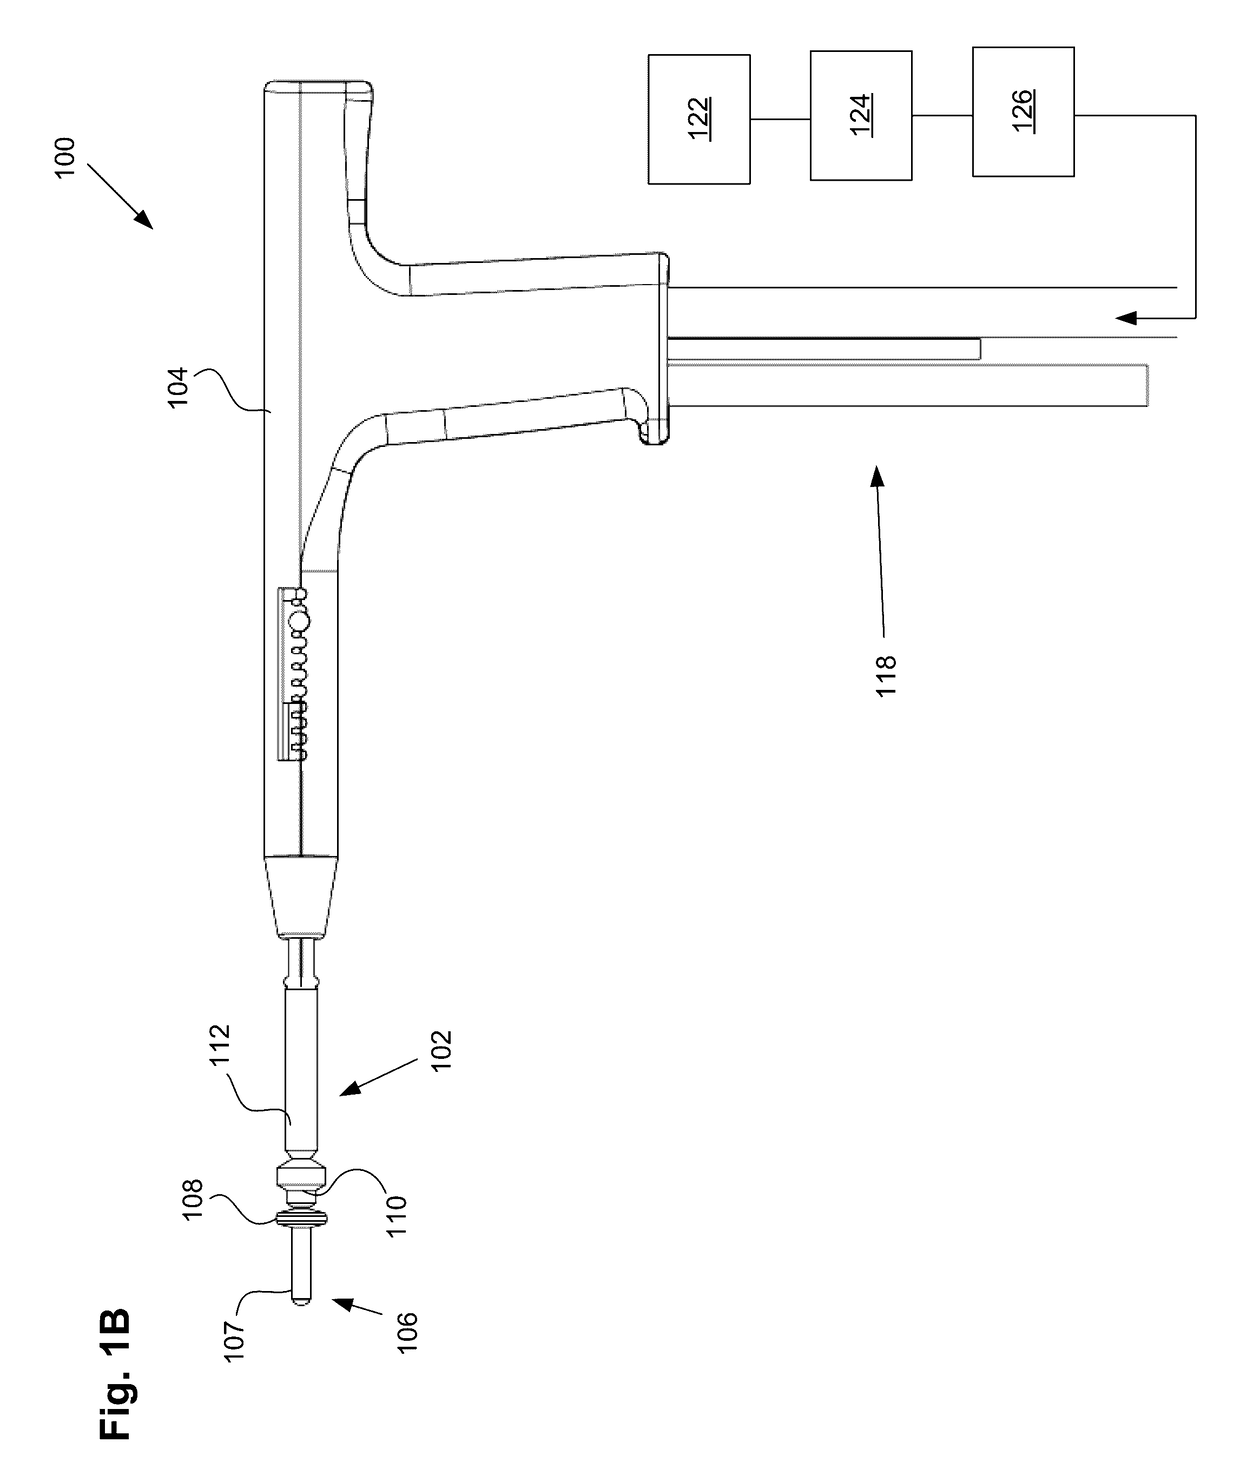 Integrity testing method and apparatus for delivering vapor to the uterus